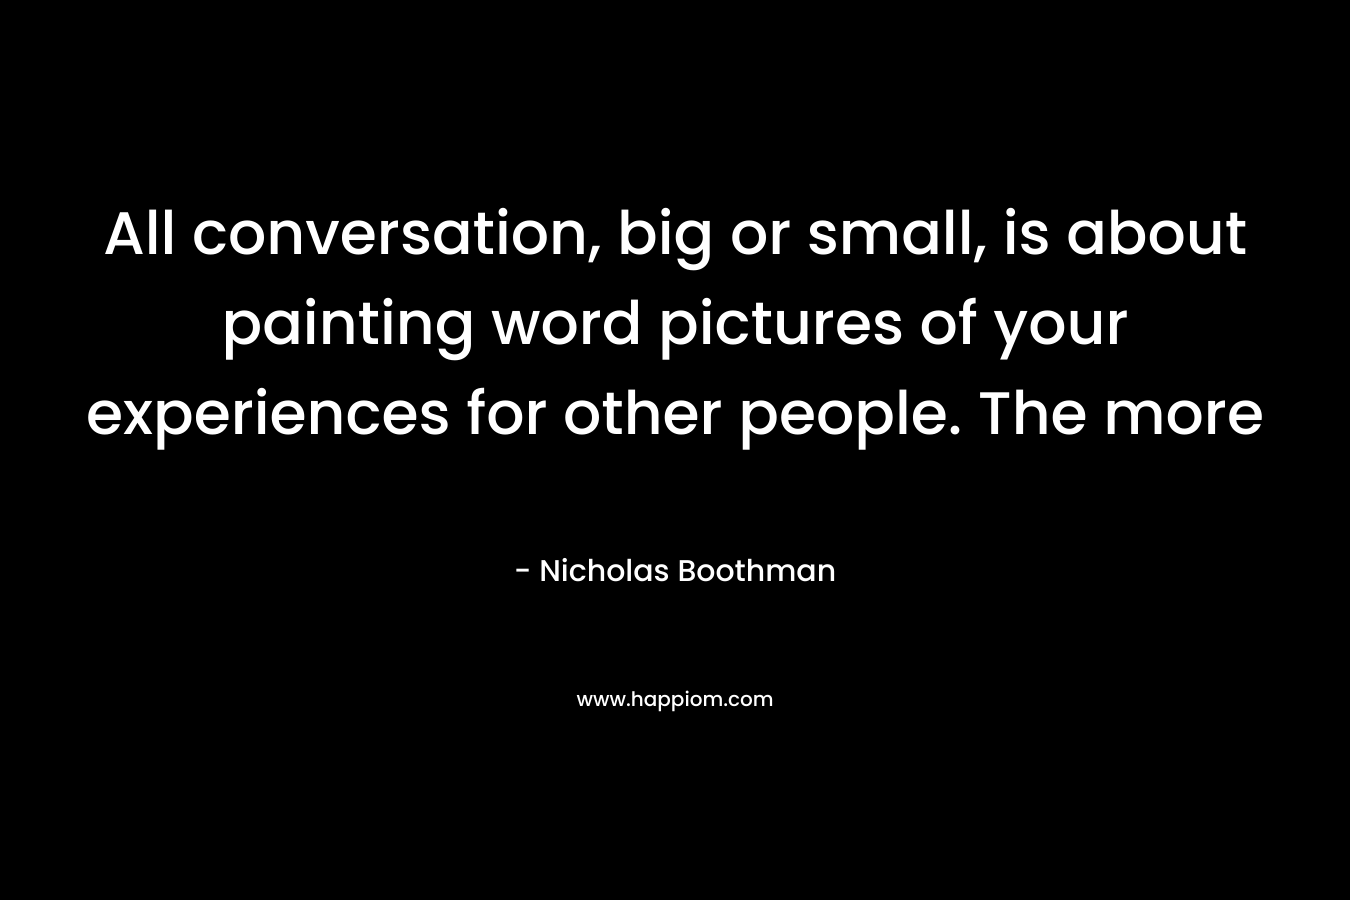 All conversation, big or small, is about painting word pictures of your experiences for other people. The more – Nicholas Boothman